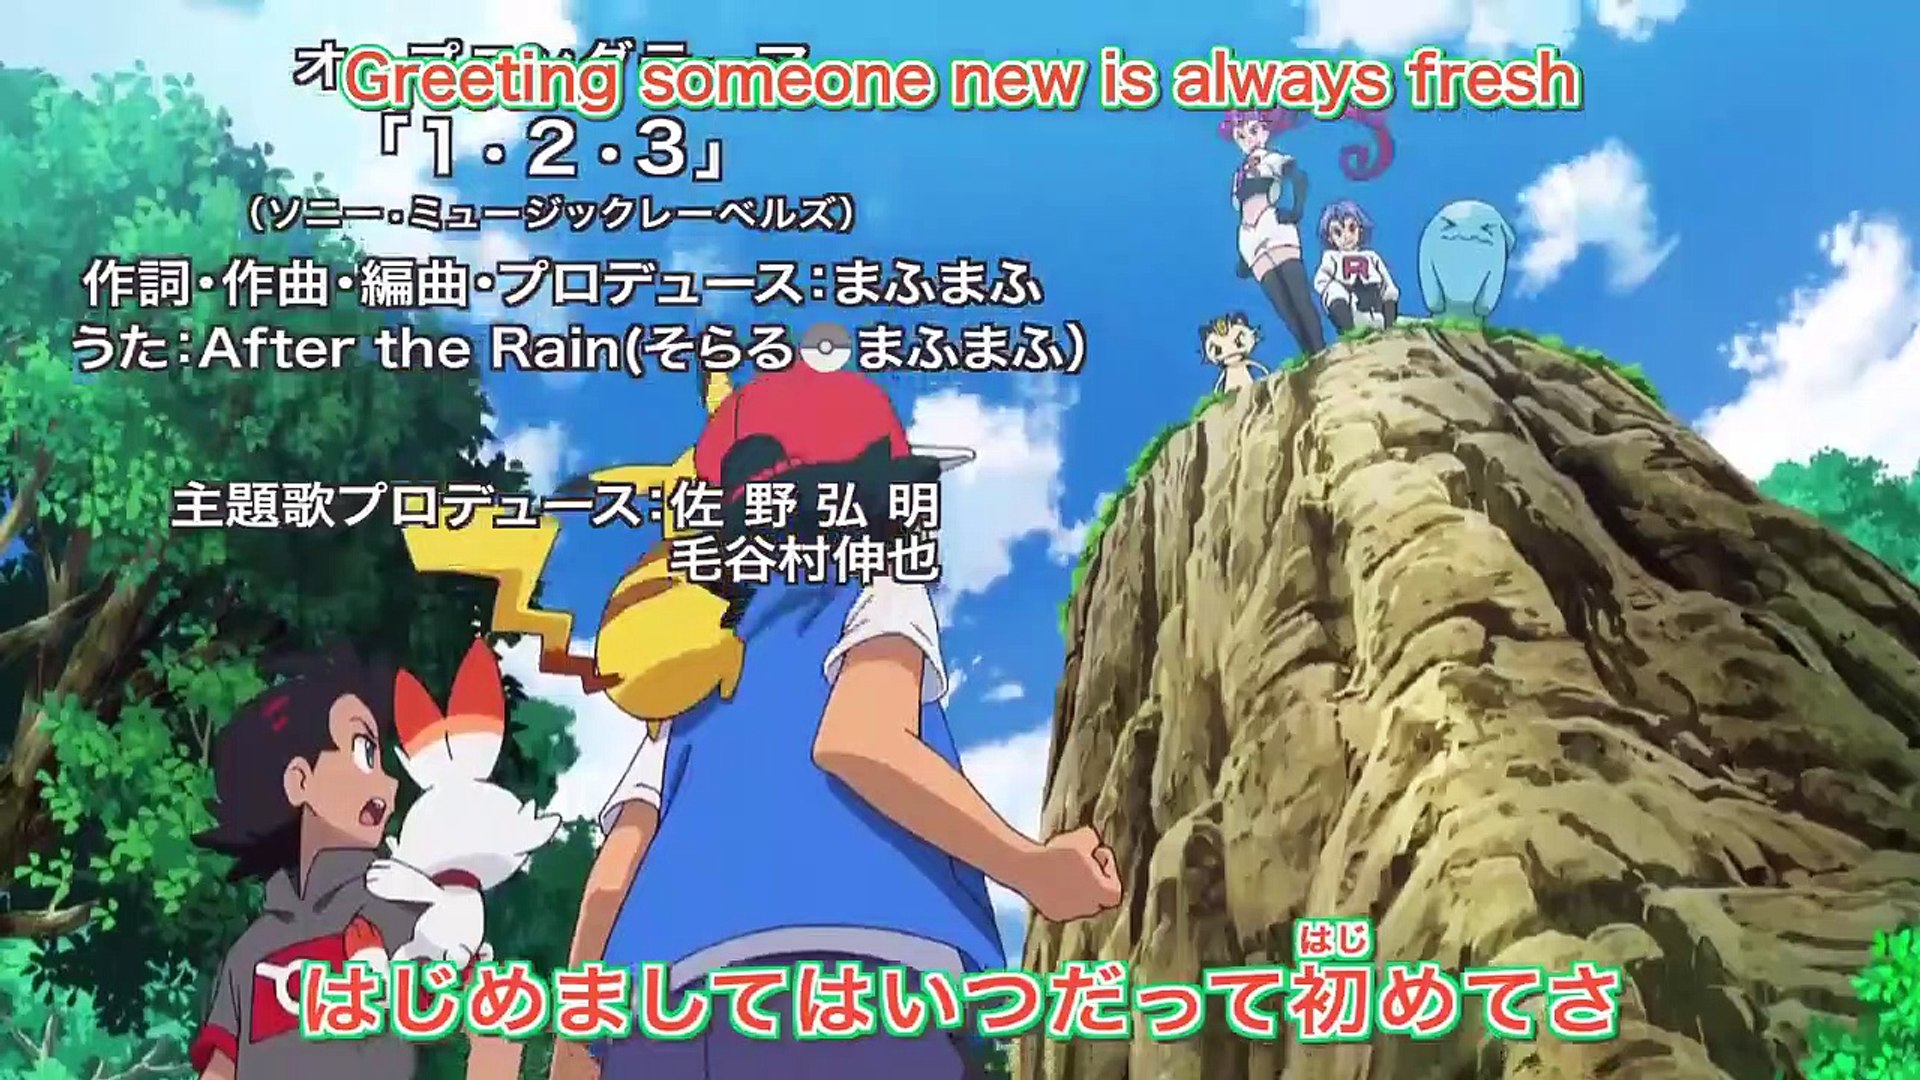 Pokemon sword and shield anime episode 11 English sub, Pokemon 2019, Pokemon season 23, Pokemon galarregion, Pokemon monsters